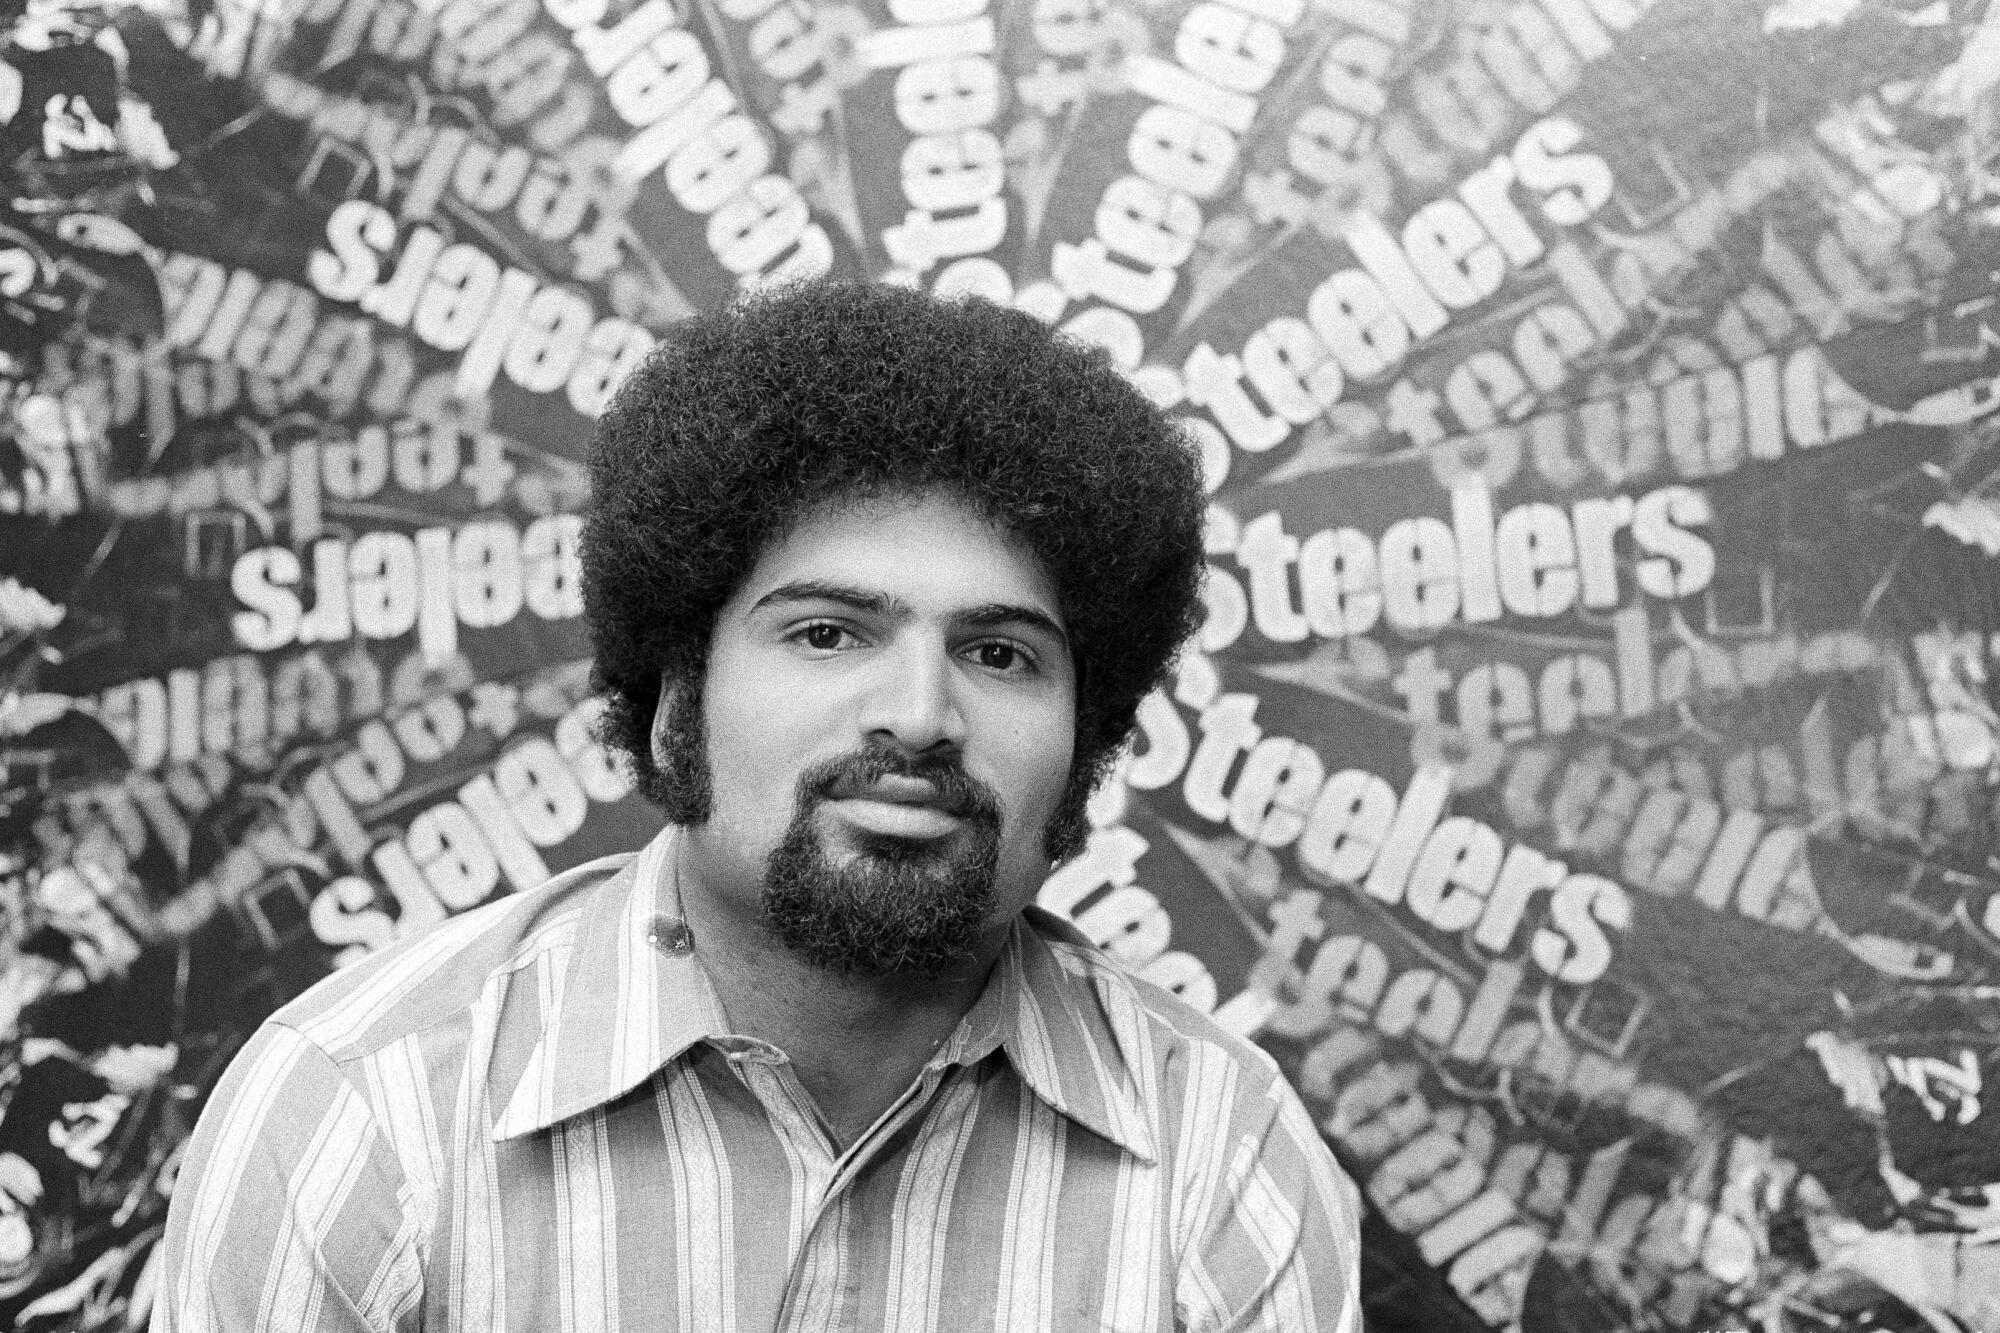 Franco Harris sits in front of a collage of Steelers posters in 1973.